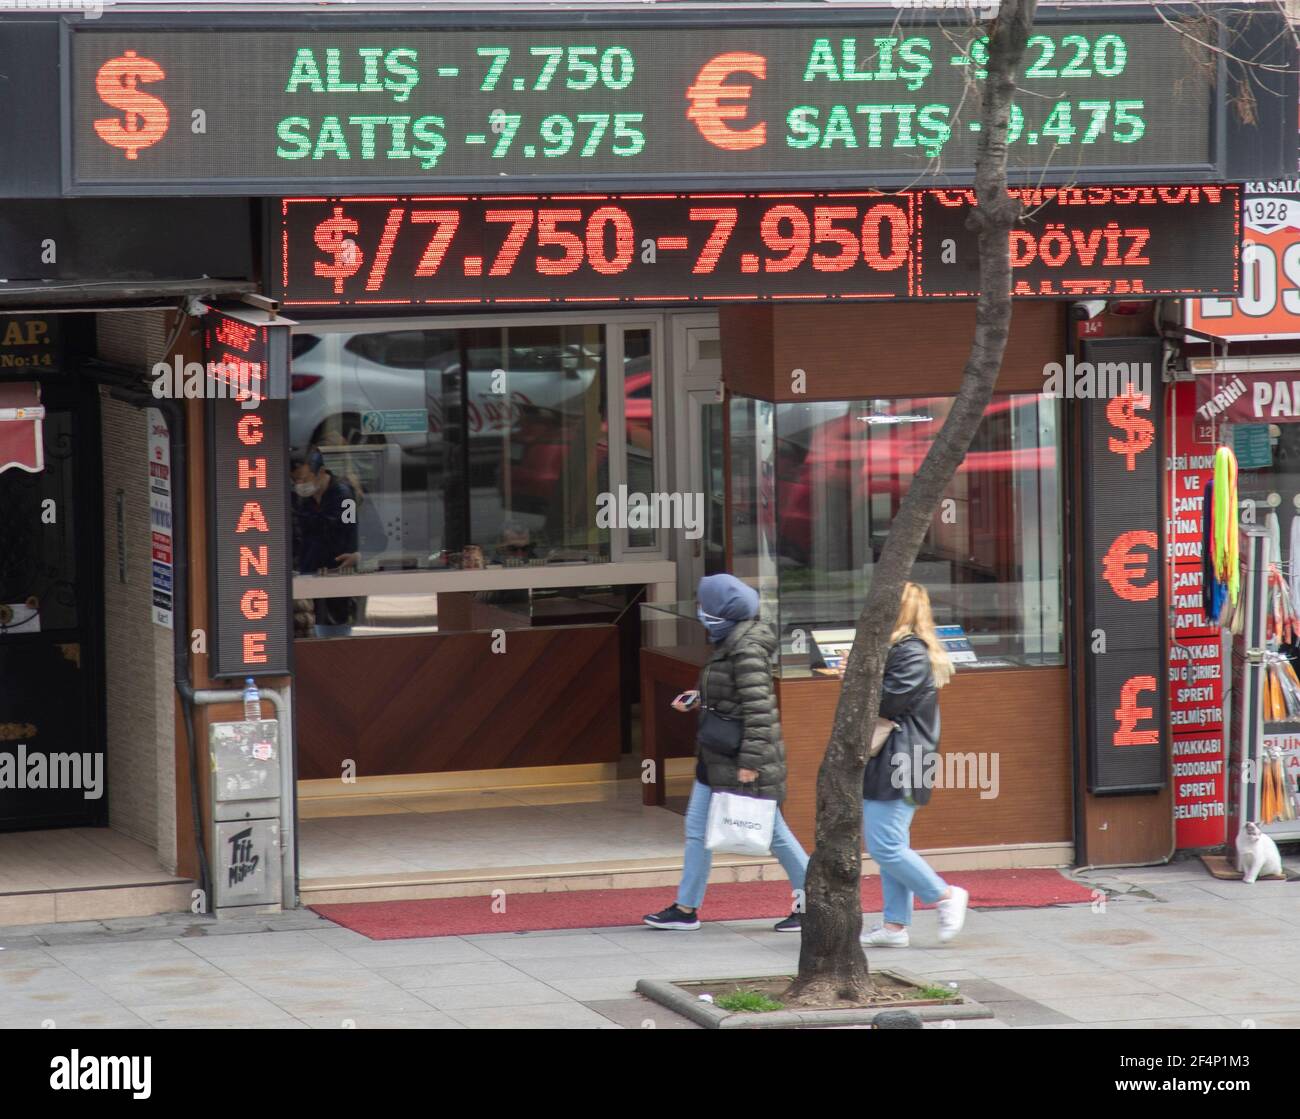 Istanbul, Turkey. 22nd Mar, 2021. Pedestrians walk past a currency exchange in Istanbul, Turkey, on March 22, 2021. Turkey's currency plunged around 11 percent on Monday after Turkish President Recep Tayyip Erdogan fired the central bank governor and appointed a critic of high interest rates, a move sparking turbulence in markets. Turkish lira was fluctuating at 8.02 against the U.S. dollar in Monday's morning trading, a sharp decline from Friday's closing level of 7.22, while the Turkish currency was also down 11 percent against the euro. Credit: Osman Orsal/Xinhua/Alamy Live News Stock Photo